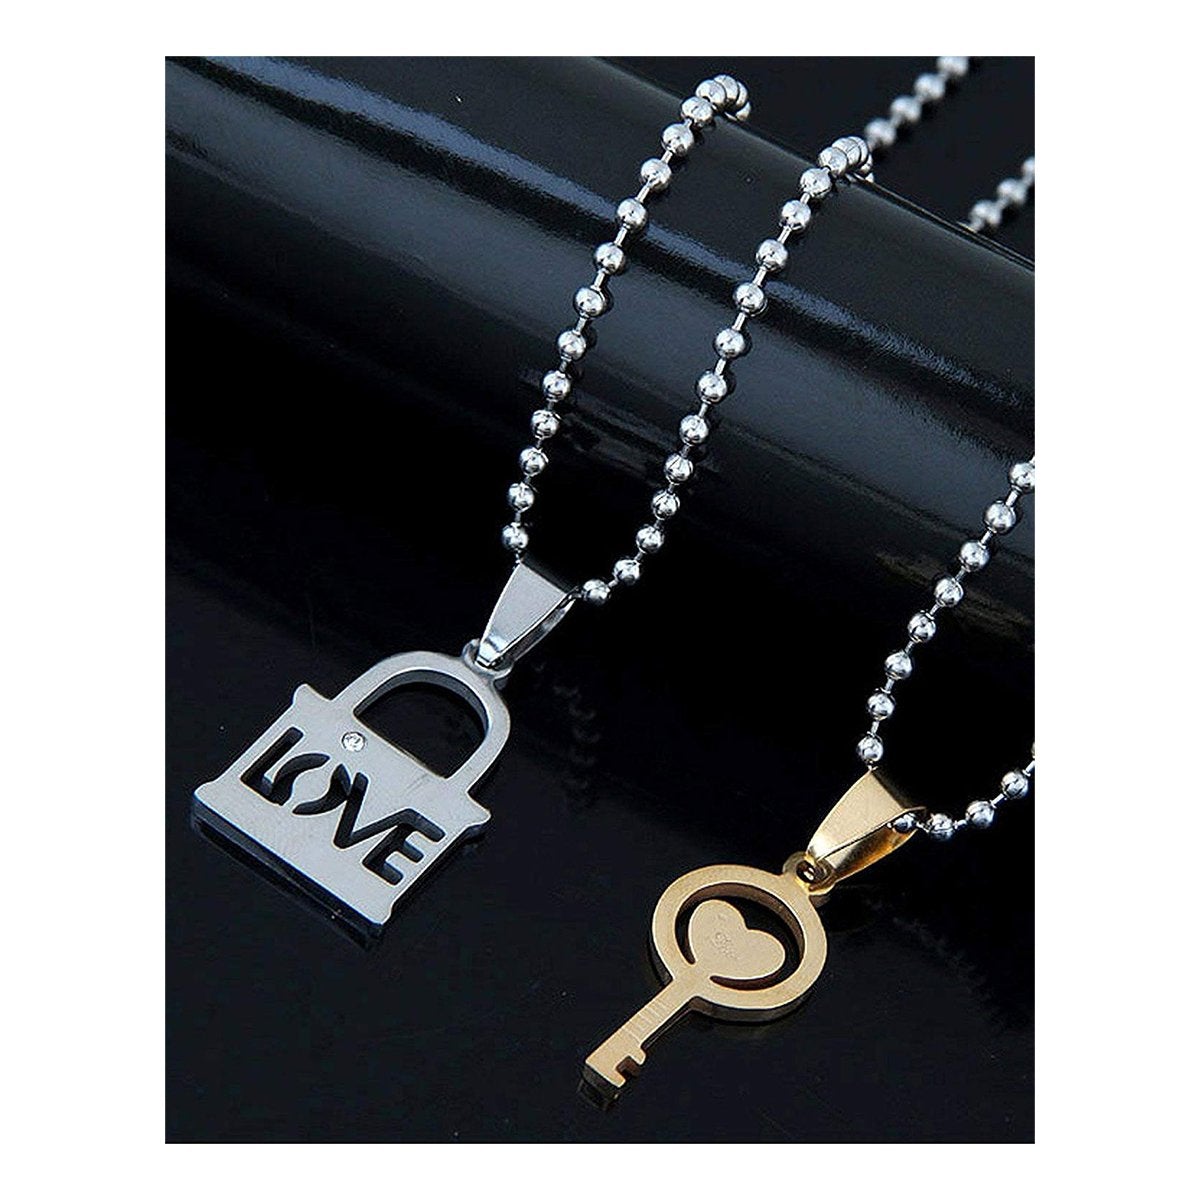 Padlock Chain Necklace, Unisex Stainless Steel Padlock Charm Necklace, Stainless Steel Link Chain